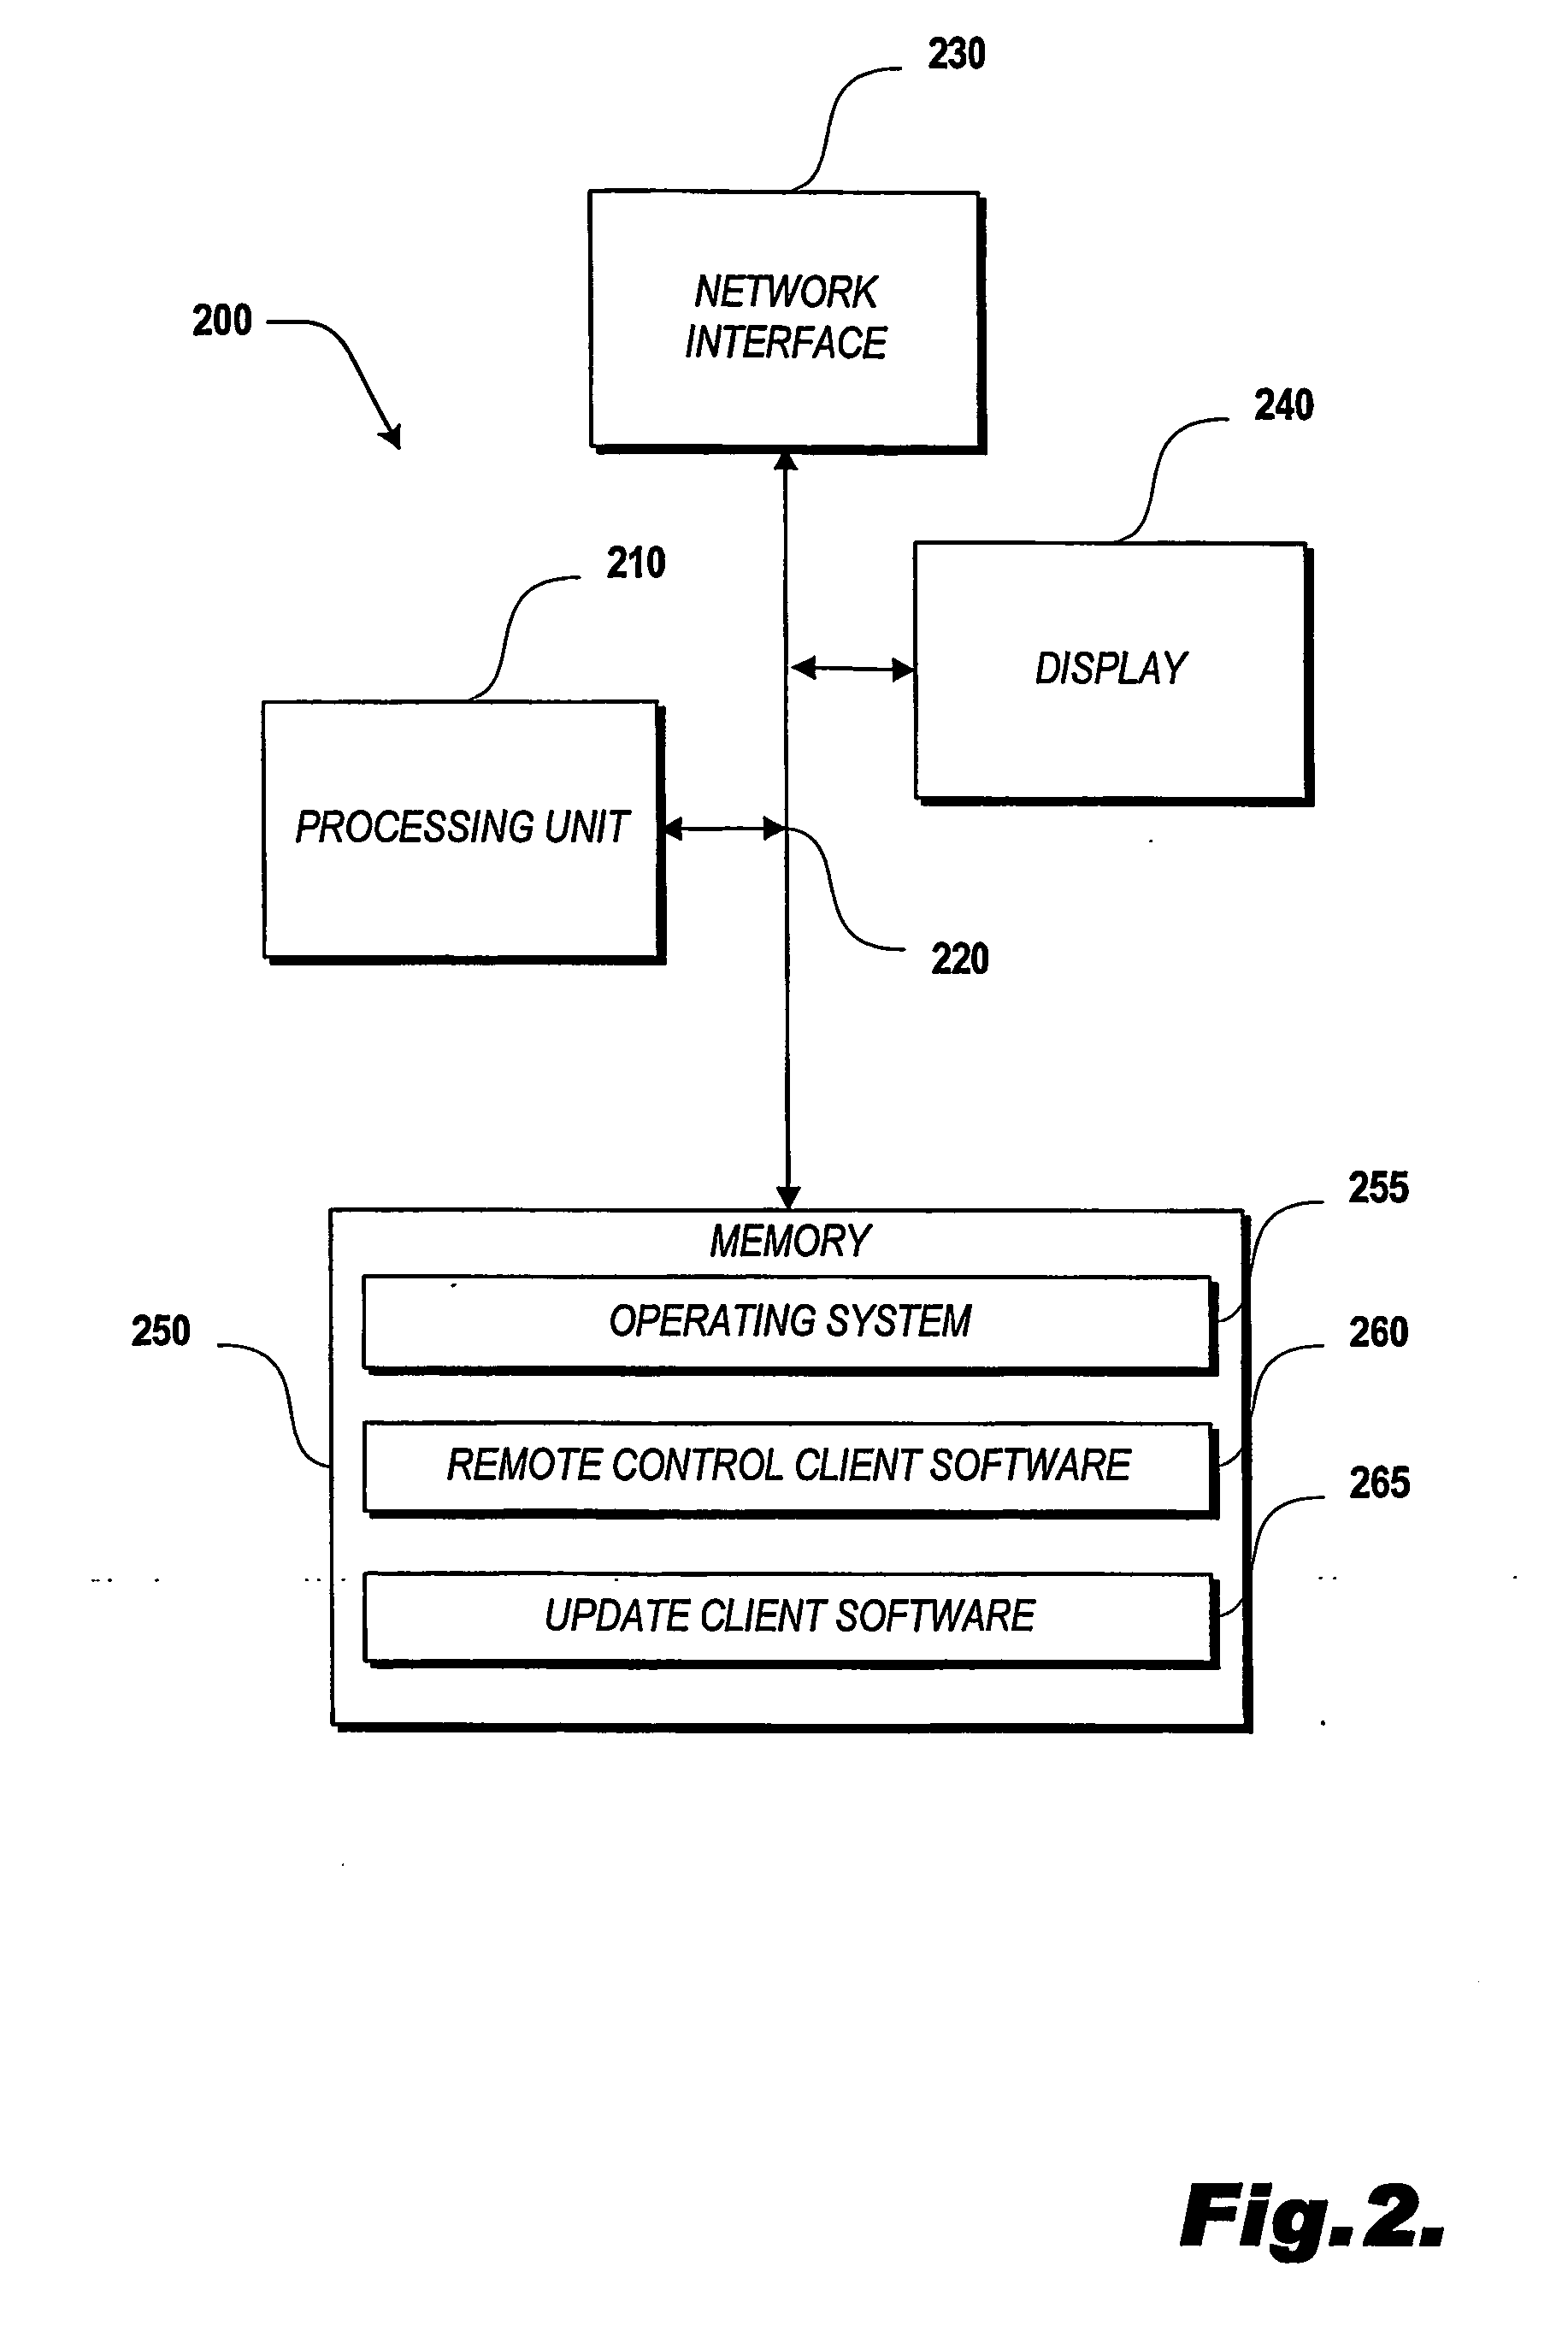 Method and apparatus for remote control and updating of wireless mobile devices